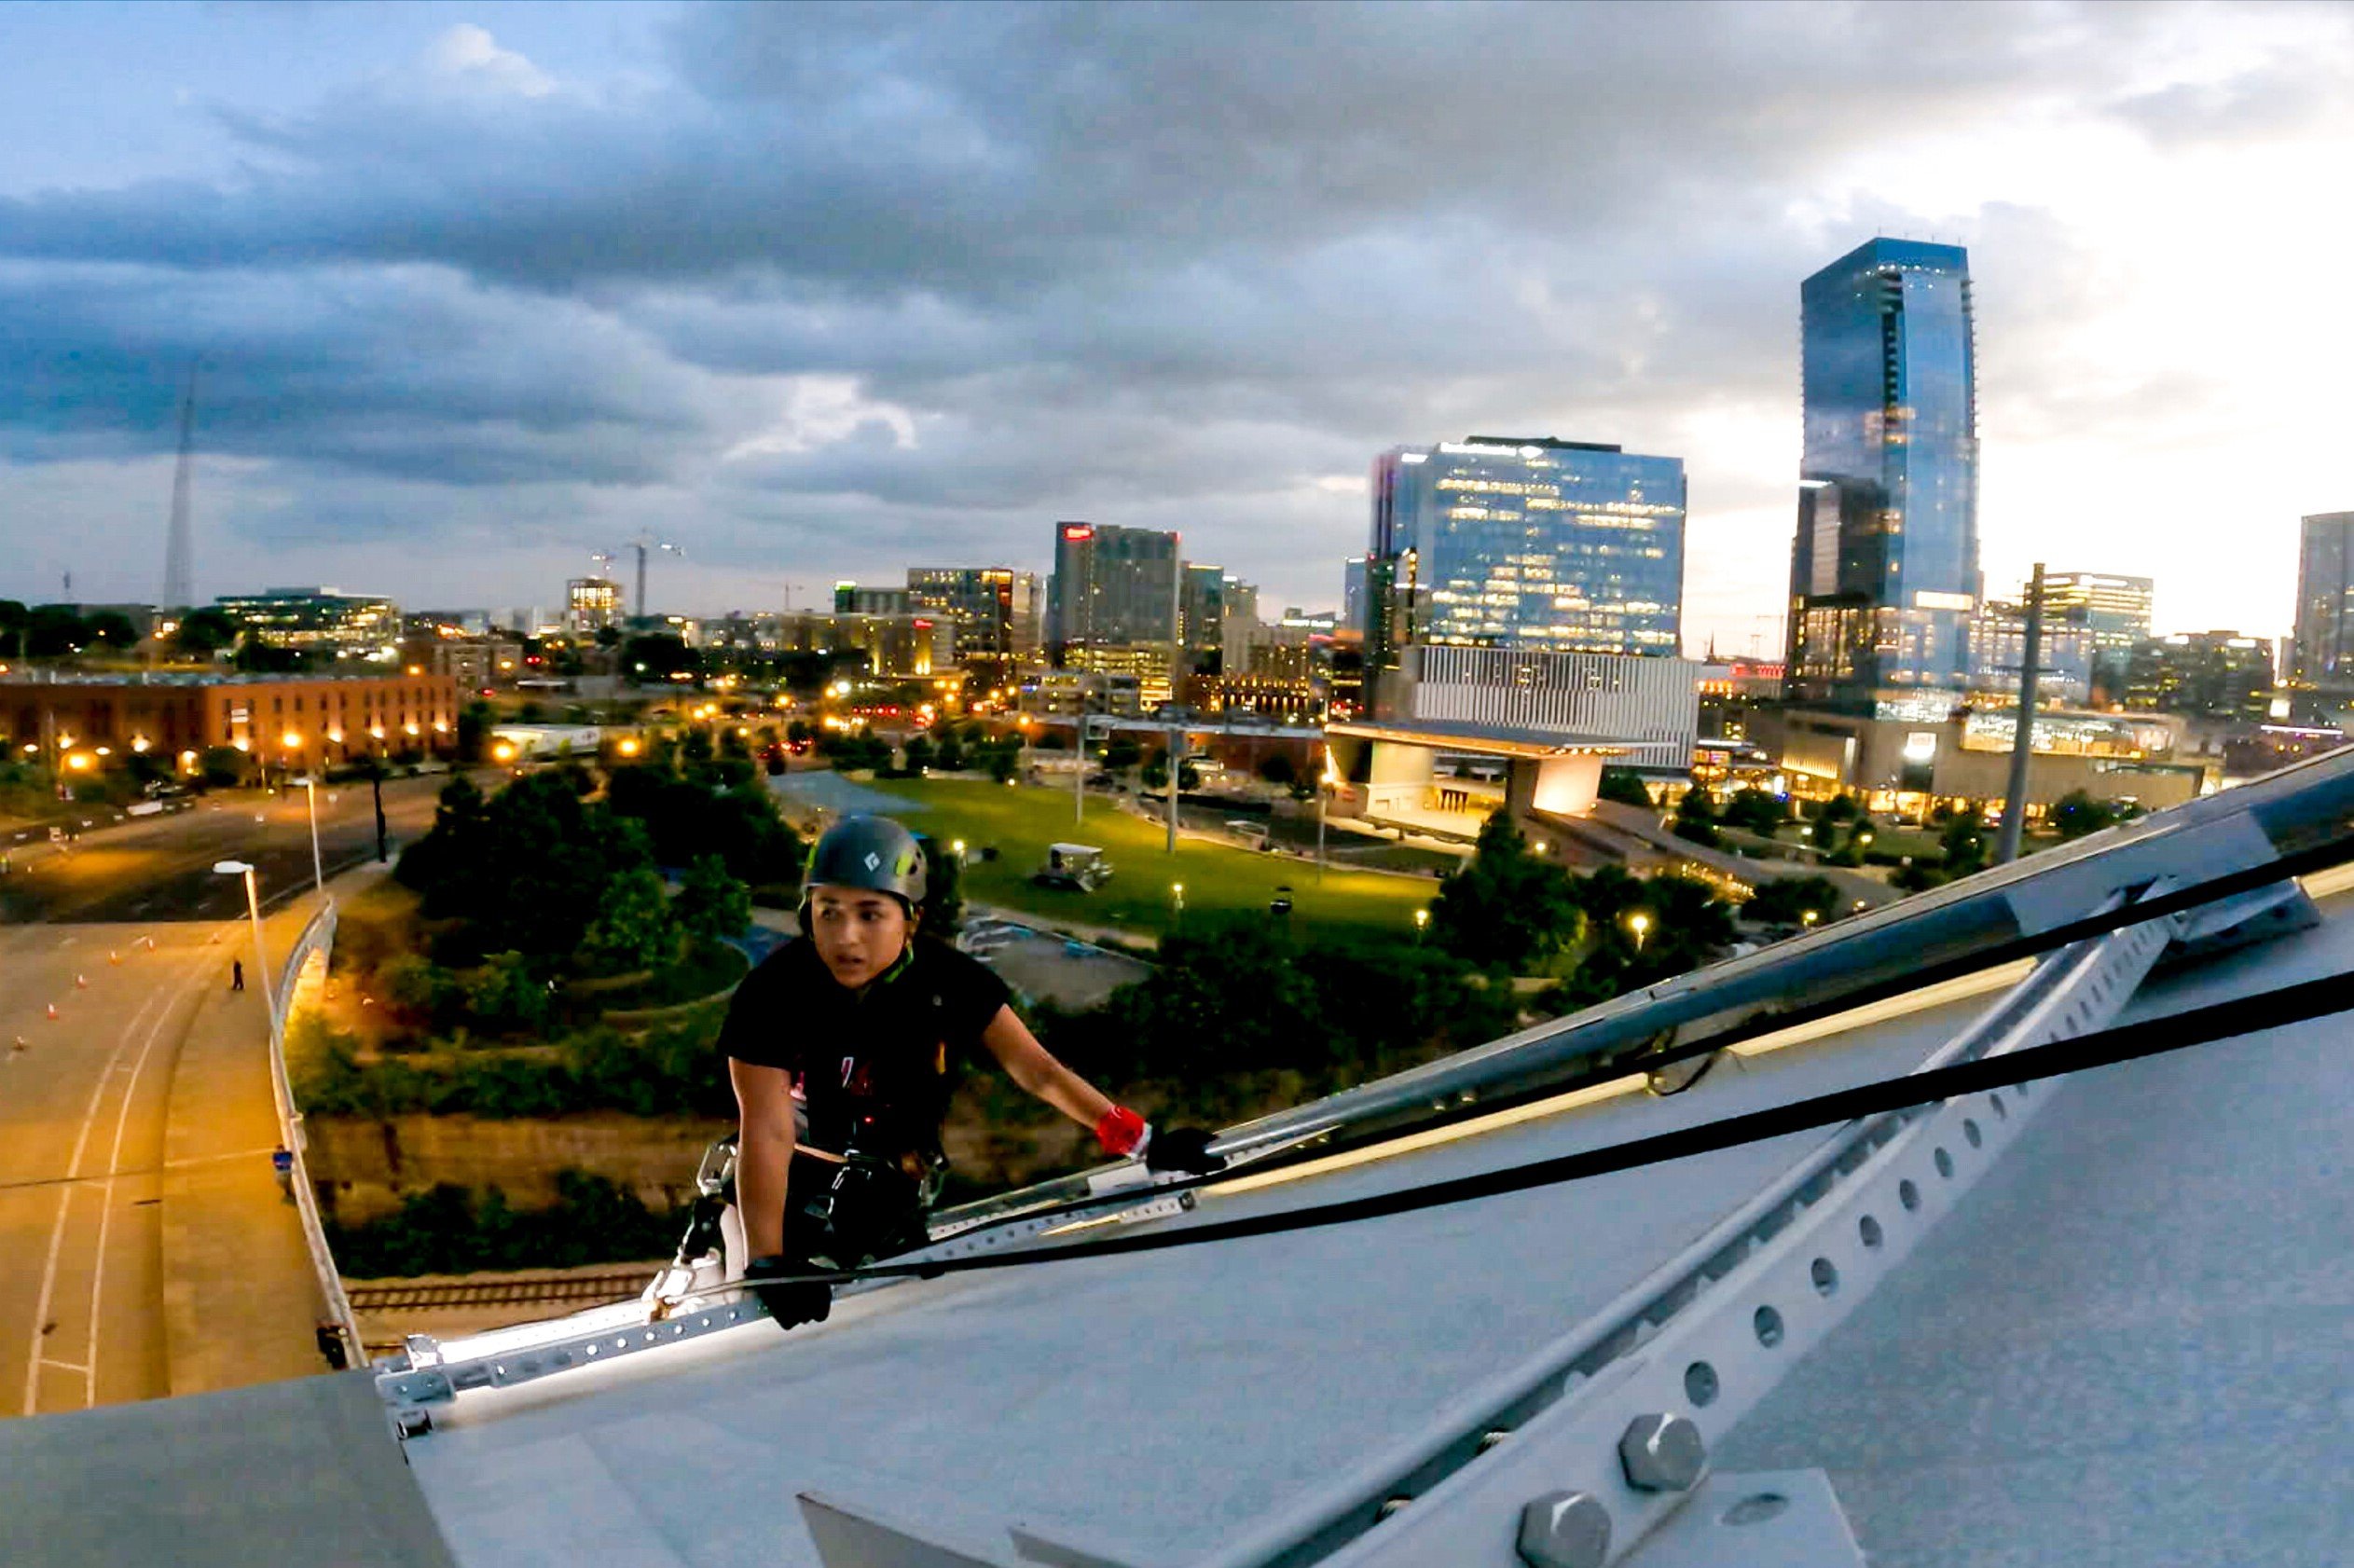 Michelle Burgos performs one of the tasks during the finale of 'The Amazing Race 34' on CBS. She scales a tall white bridge wearing a black shirt, black pants, and a dark green helmet.